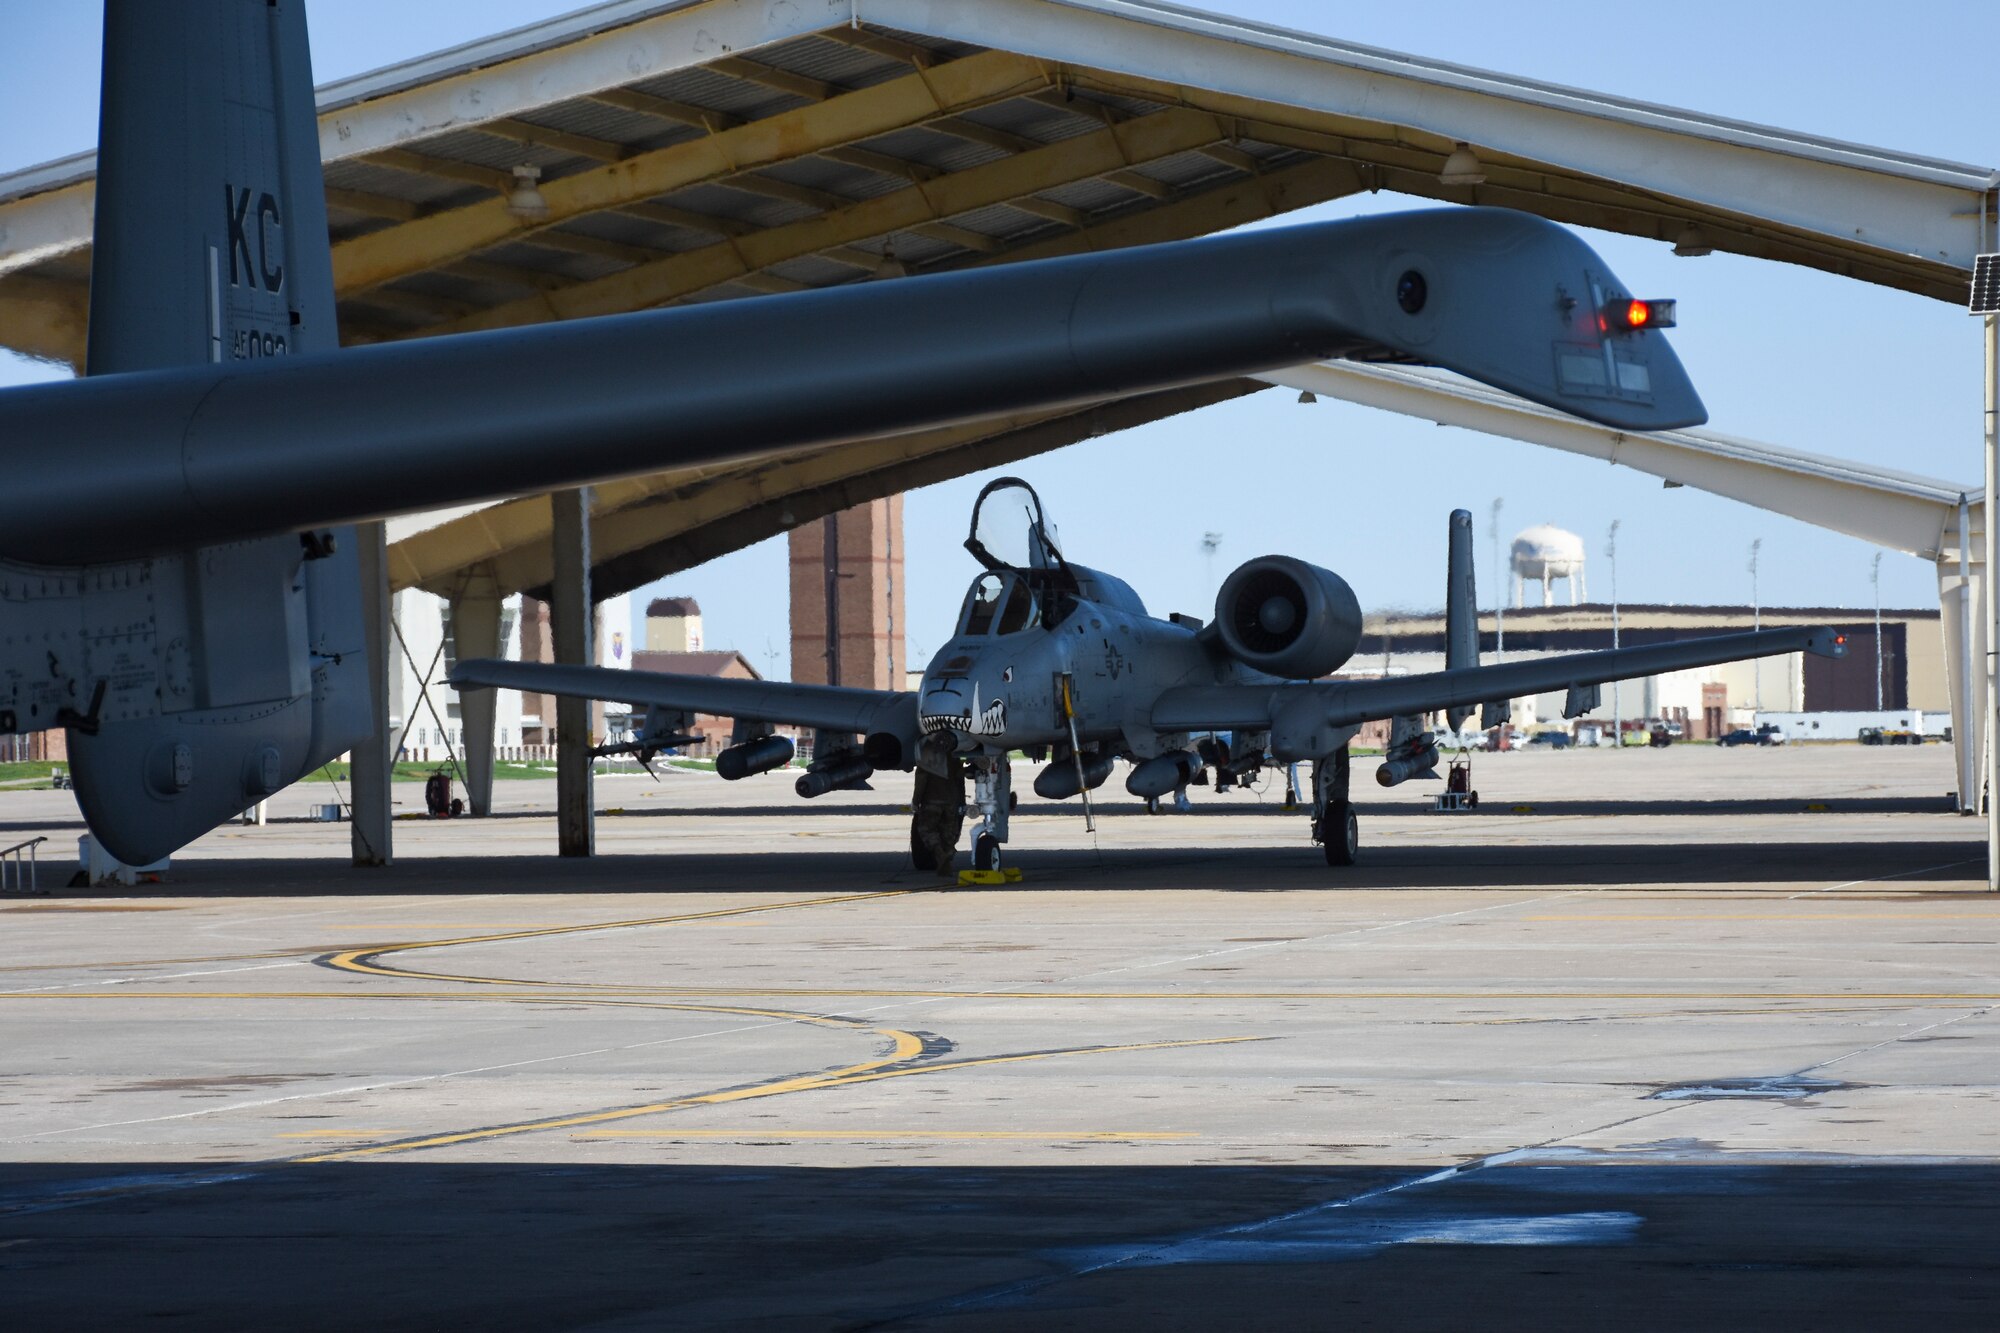 Ten Air Force Reserve Command A-10C Thunderbolt II attack aircraft assigned to the 442nd Fighter Wing, based at Whiteman Air Force Base, Missouri, are slated to arrive in the USAFE-AFAFRICA area of operations to support DEFENDER 23, May 2023.